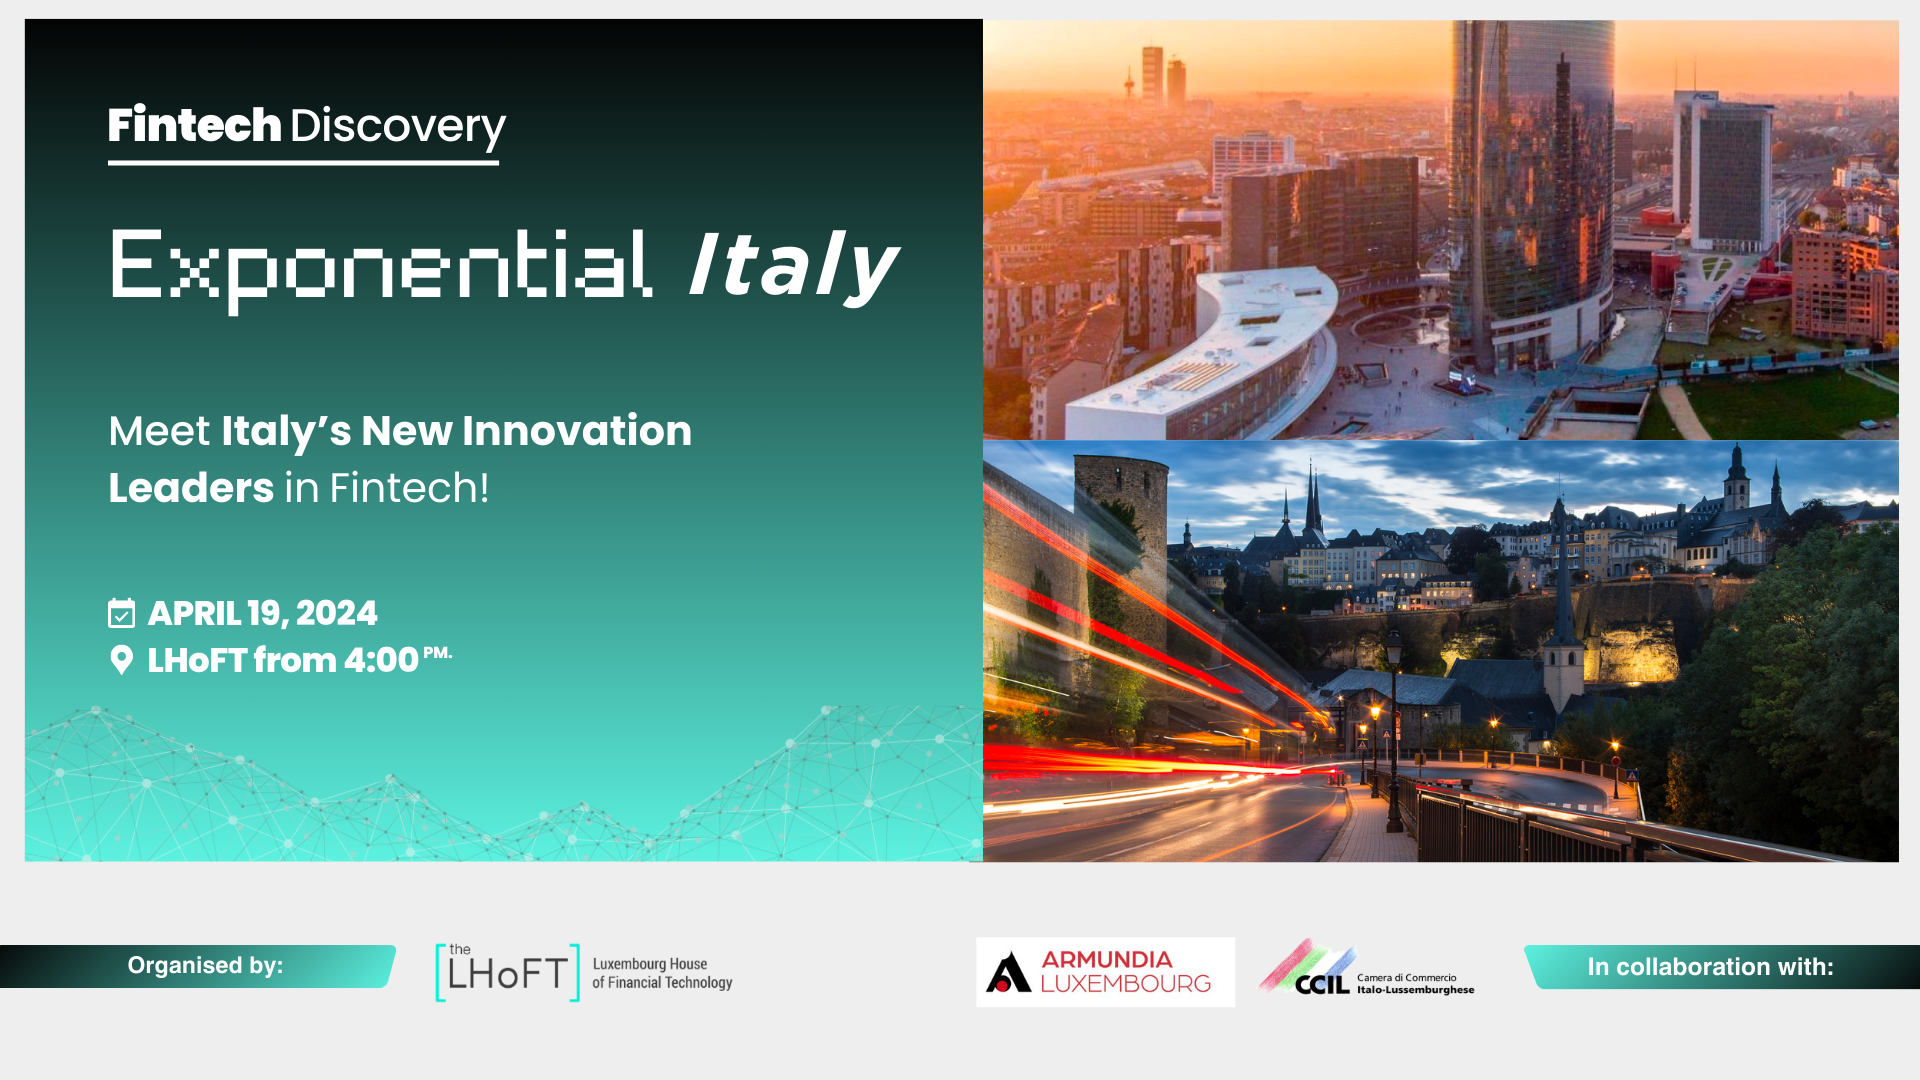 Fintech Discovery Exponential Italy